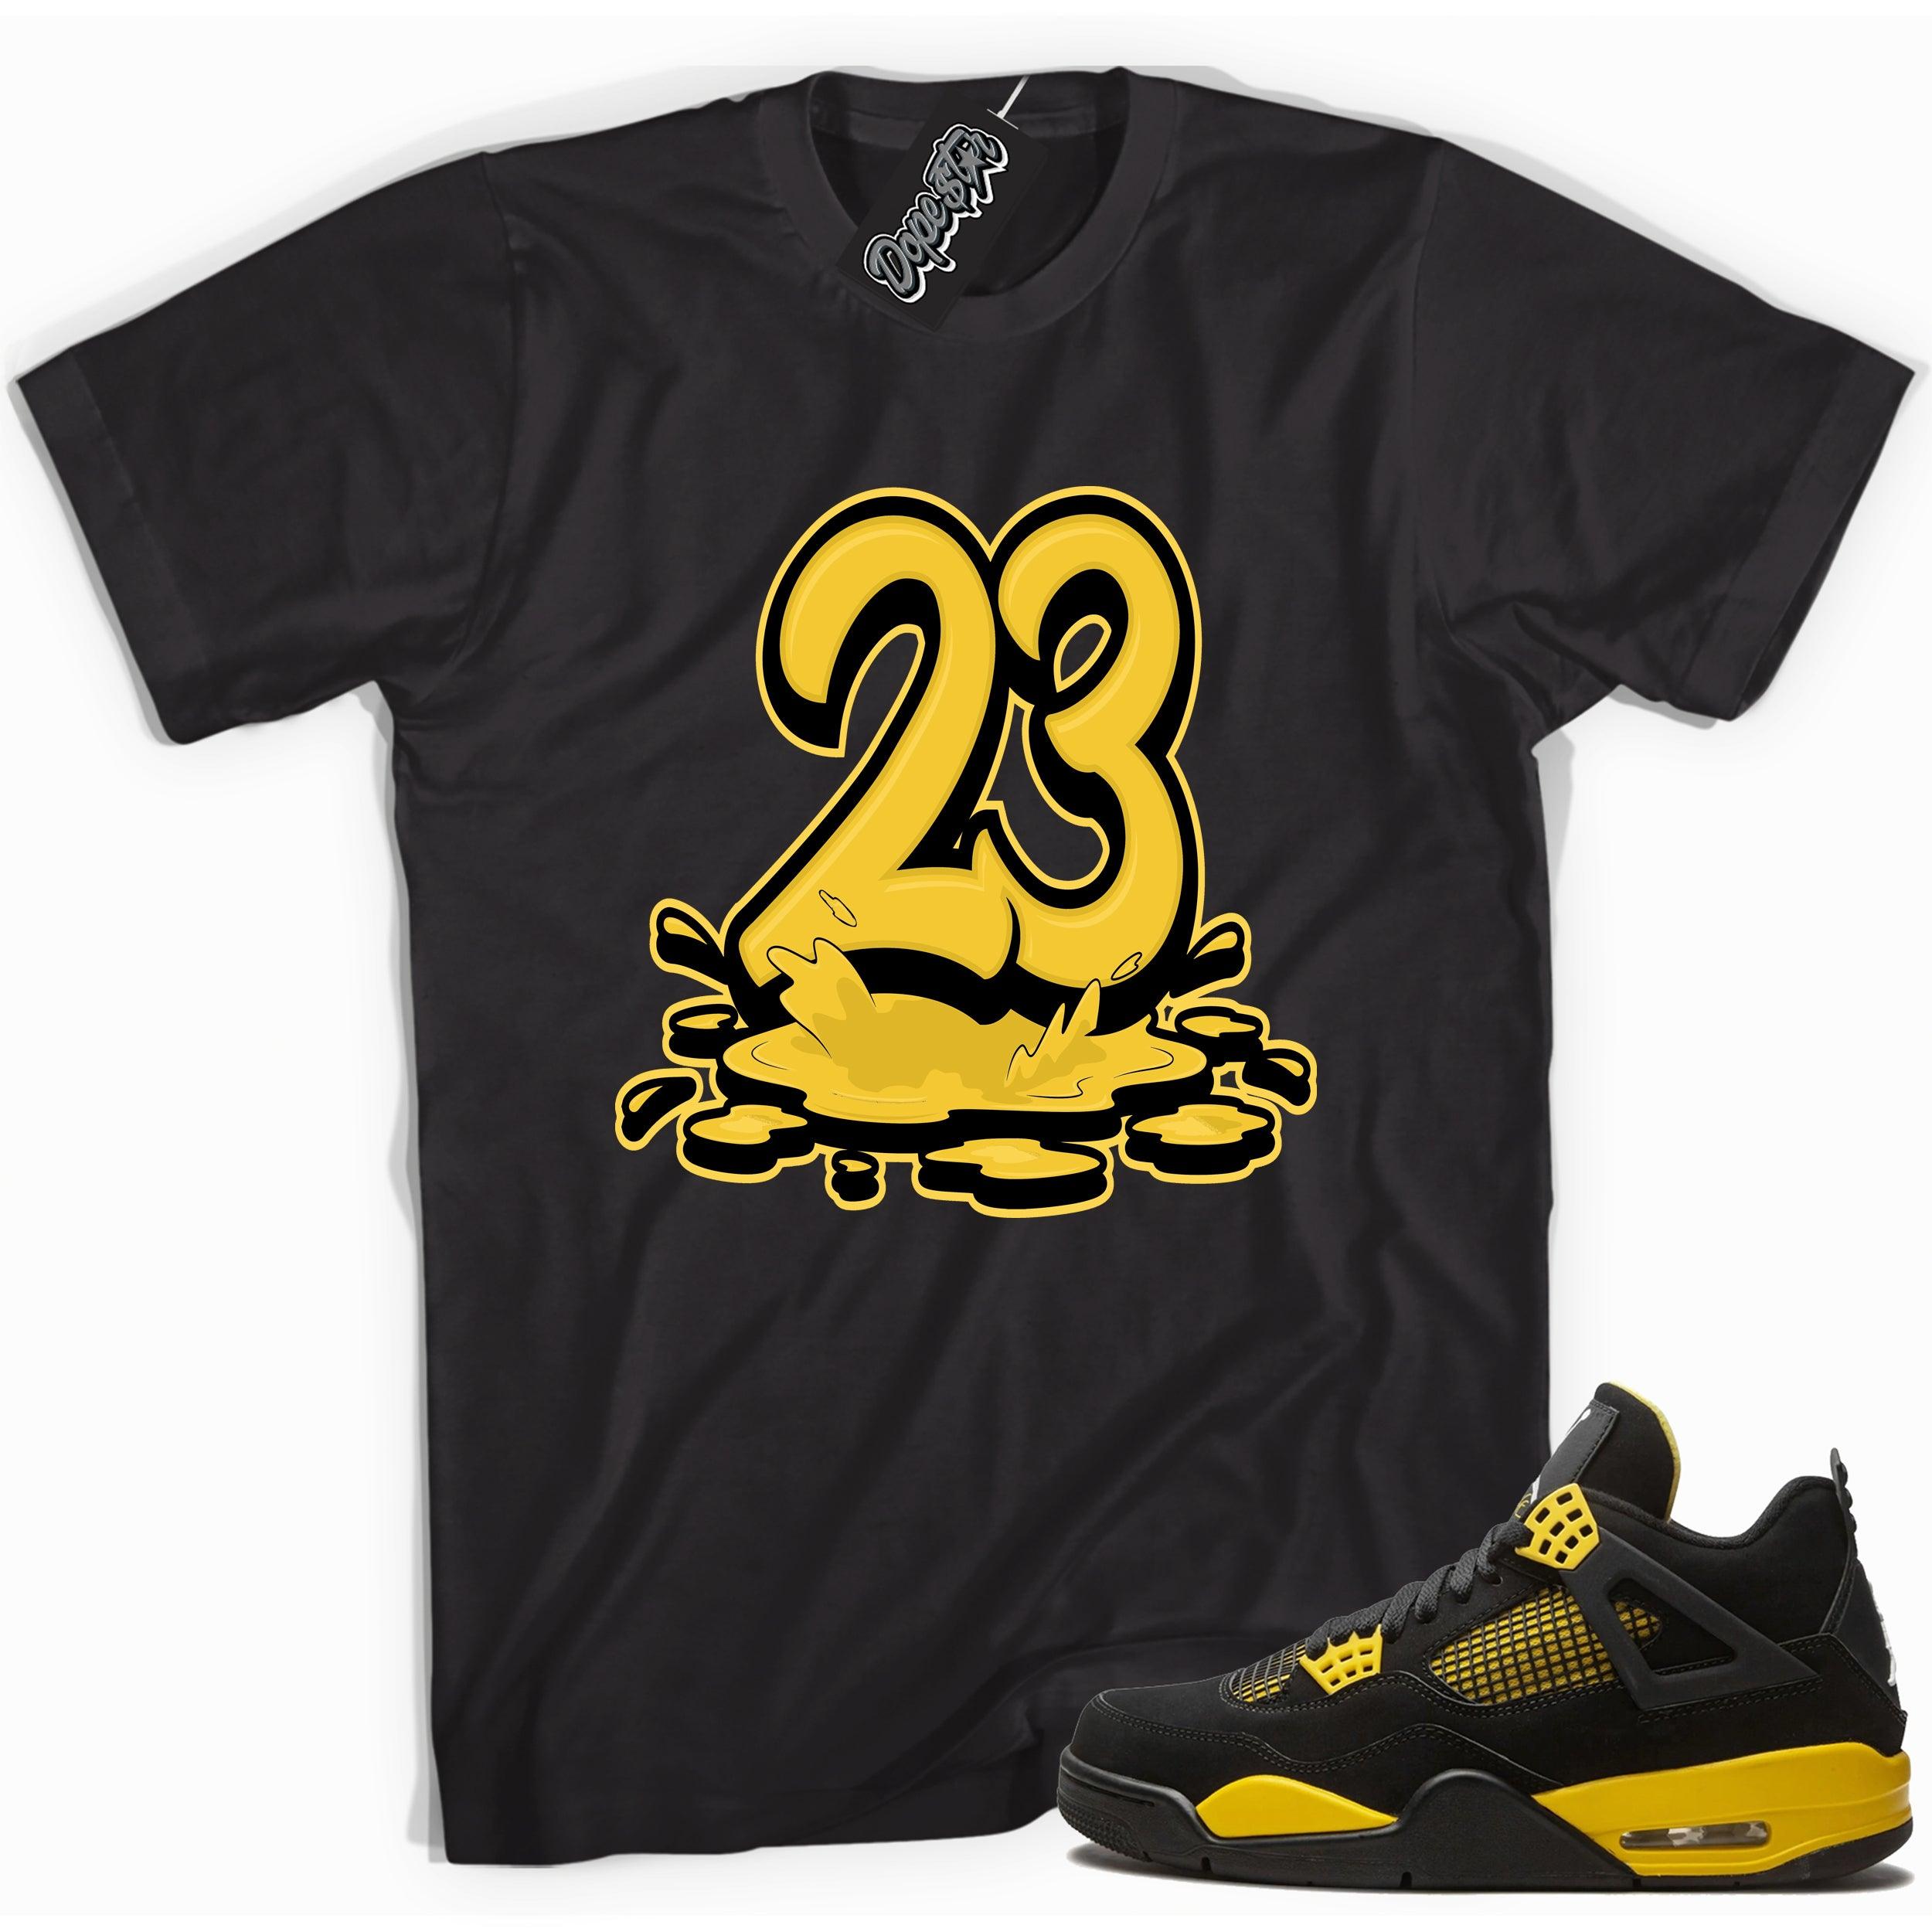 Cool black graphic tee with '23' print, that perfectly matches  Air Jordan 4 Thunder sneakers